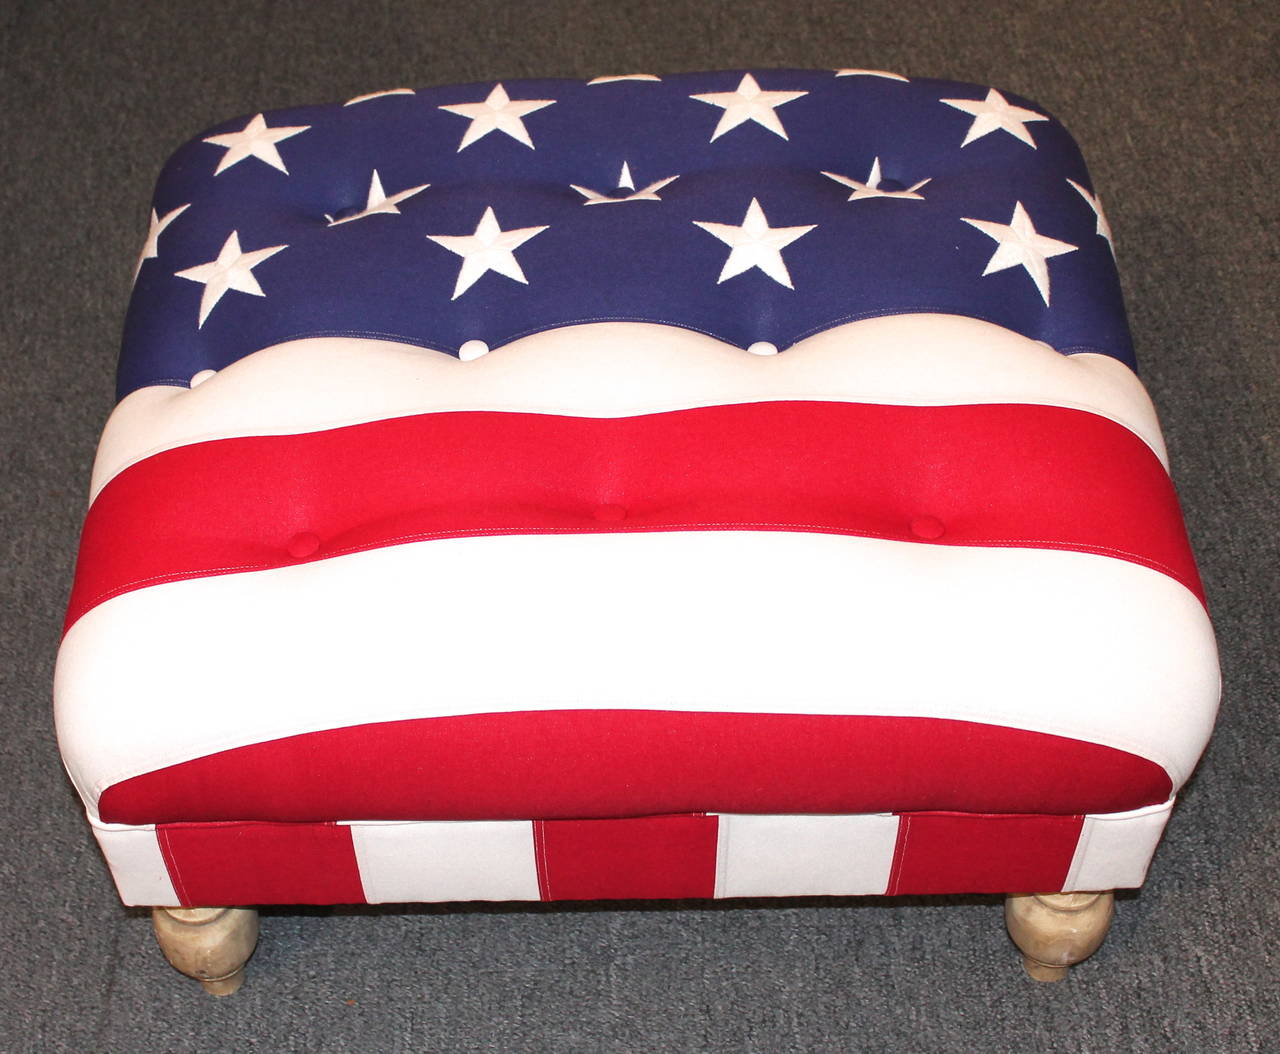 Wonderful and patriotic large ottoman upholstered in a 48 star embroidered wool flag. The spool feet are hand-turned and painted in a distressed cream paint. The condition is very good and sturdy. This could even work as a cocktail table with glass